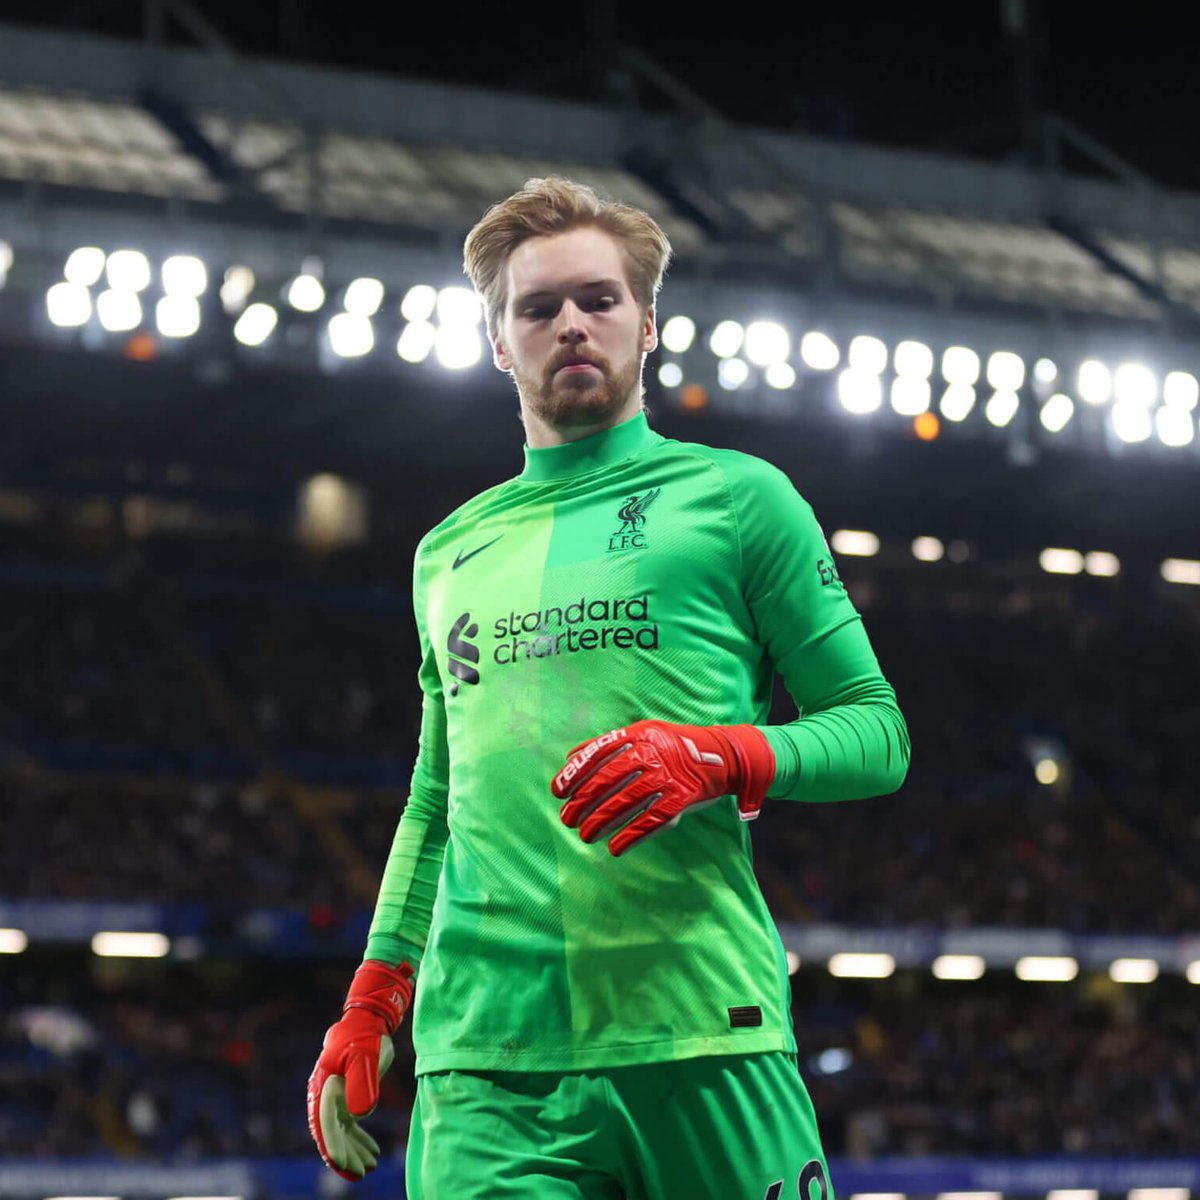 Huge respect to this guy. At 25 & with very little game time he had to step up and cover for the best goalkeeper in the world in Klopp’s last season in charge in a crucial title race. We’ve barely felt Alisson’s absence due to his great leadership and talent. Caoimhin Kelleher